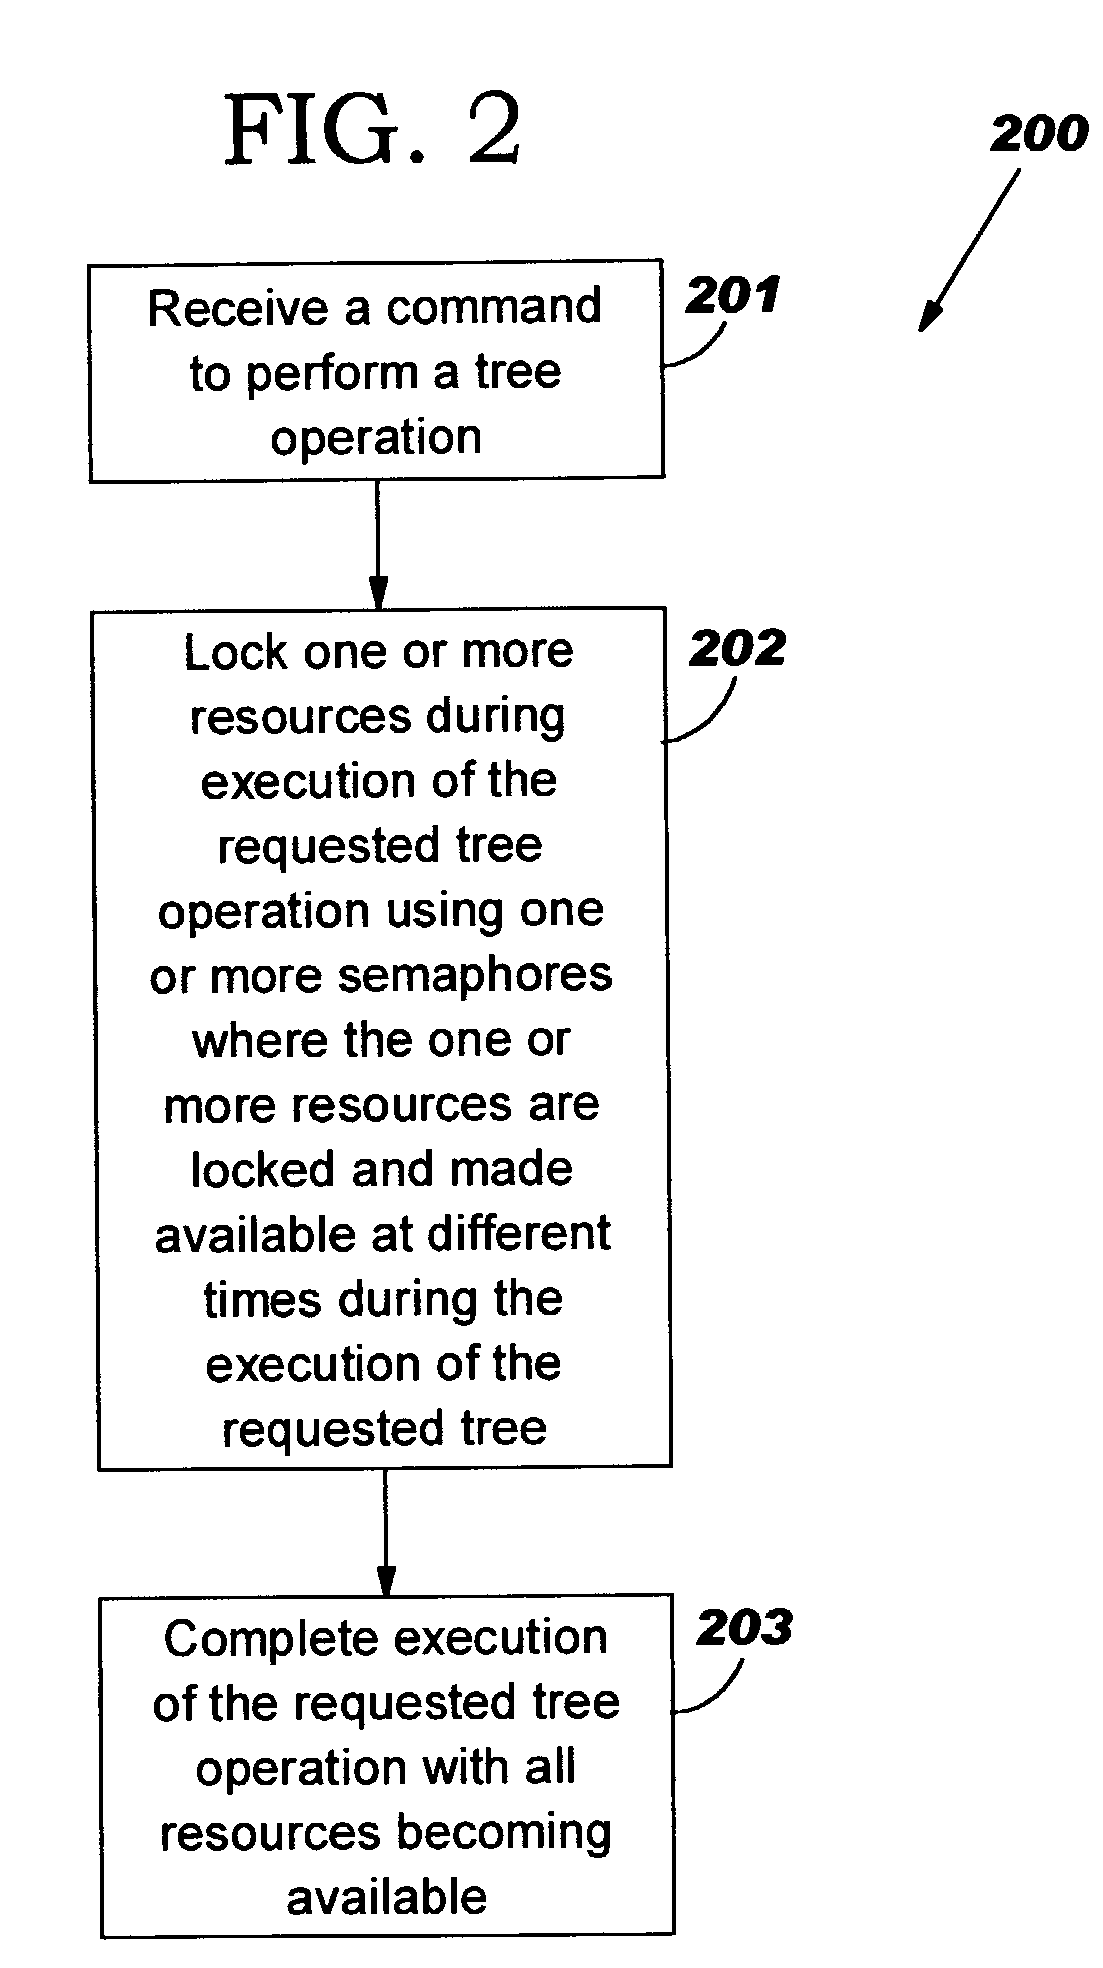 Eliminating memory corruption when performing tree functions on multiple threads